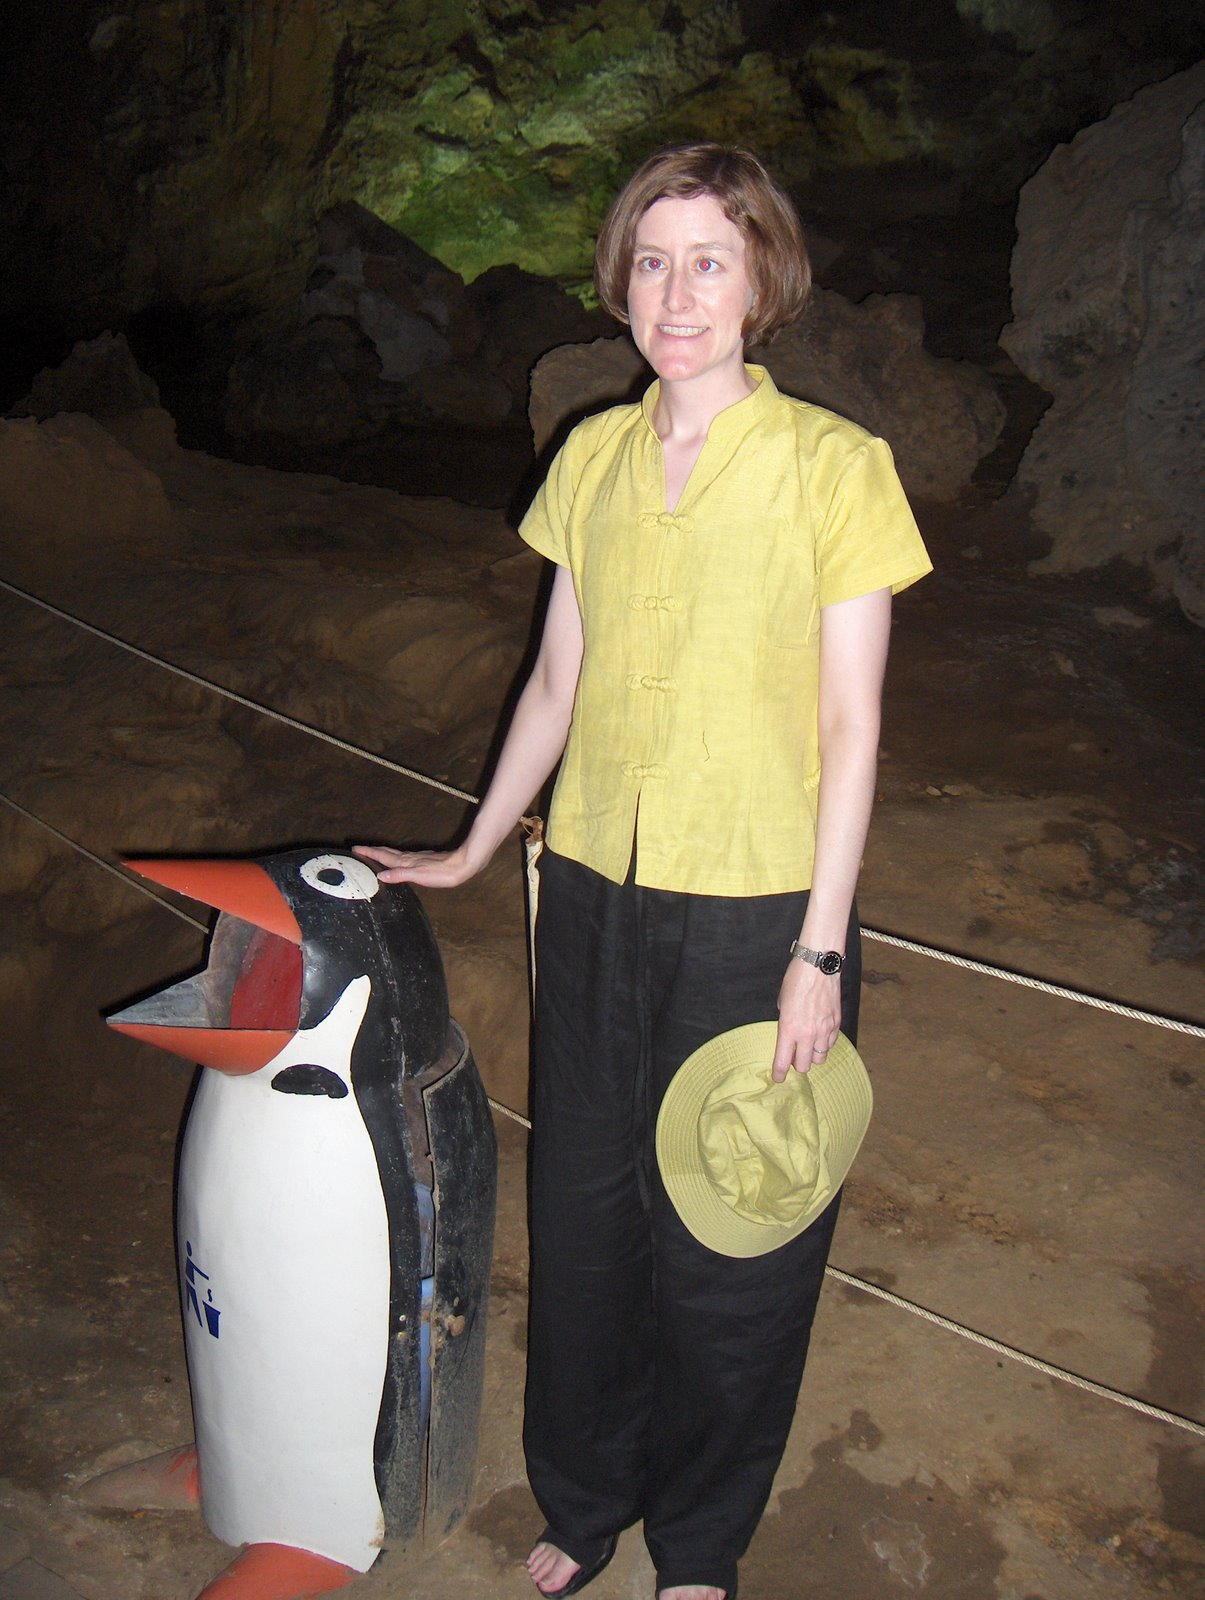 [Lisa+with+a+penguin+trash+can+in+cave.JPG]